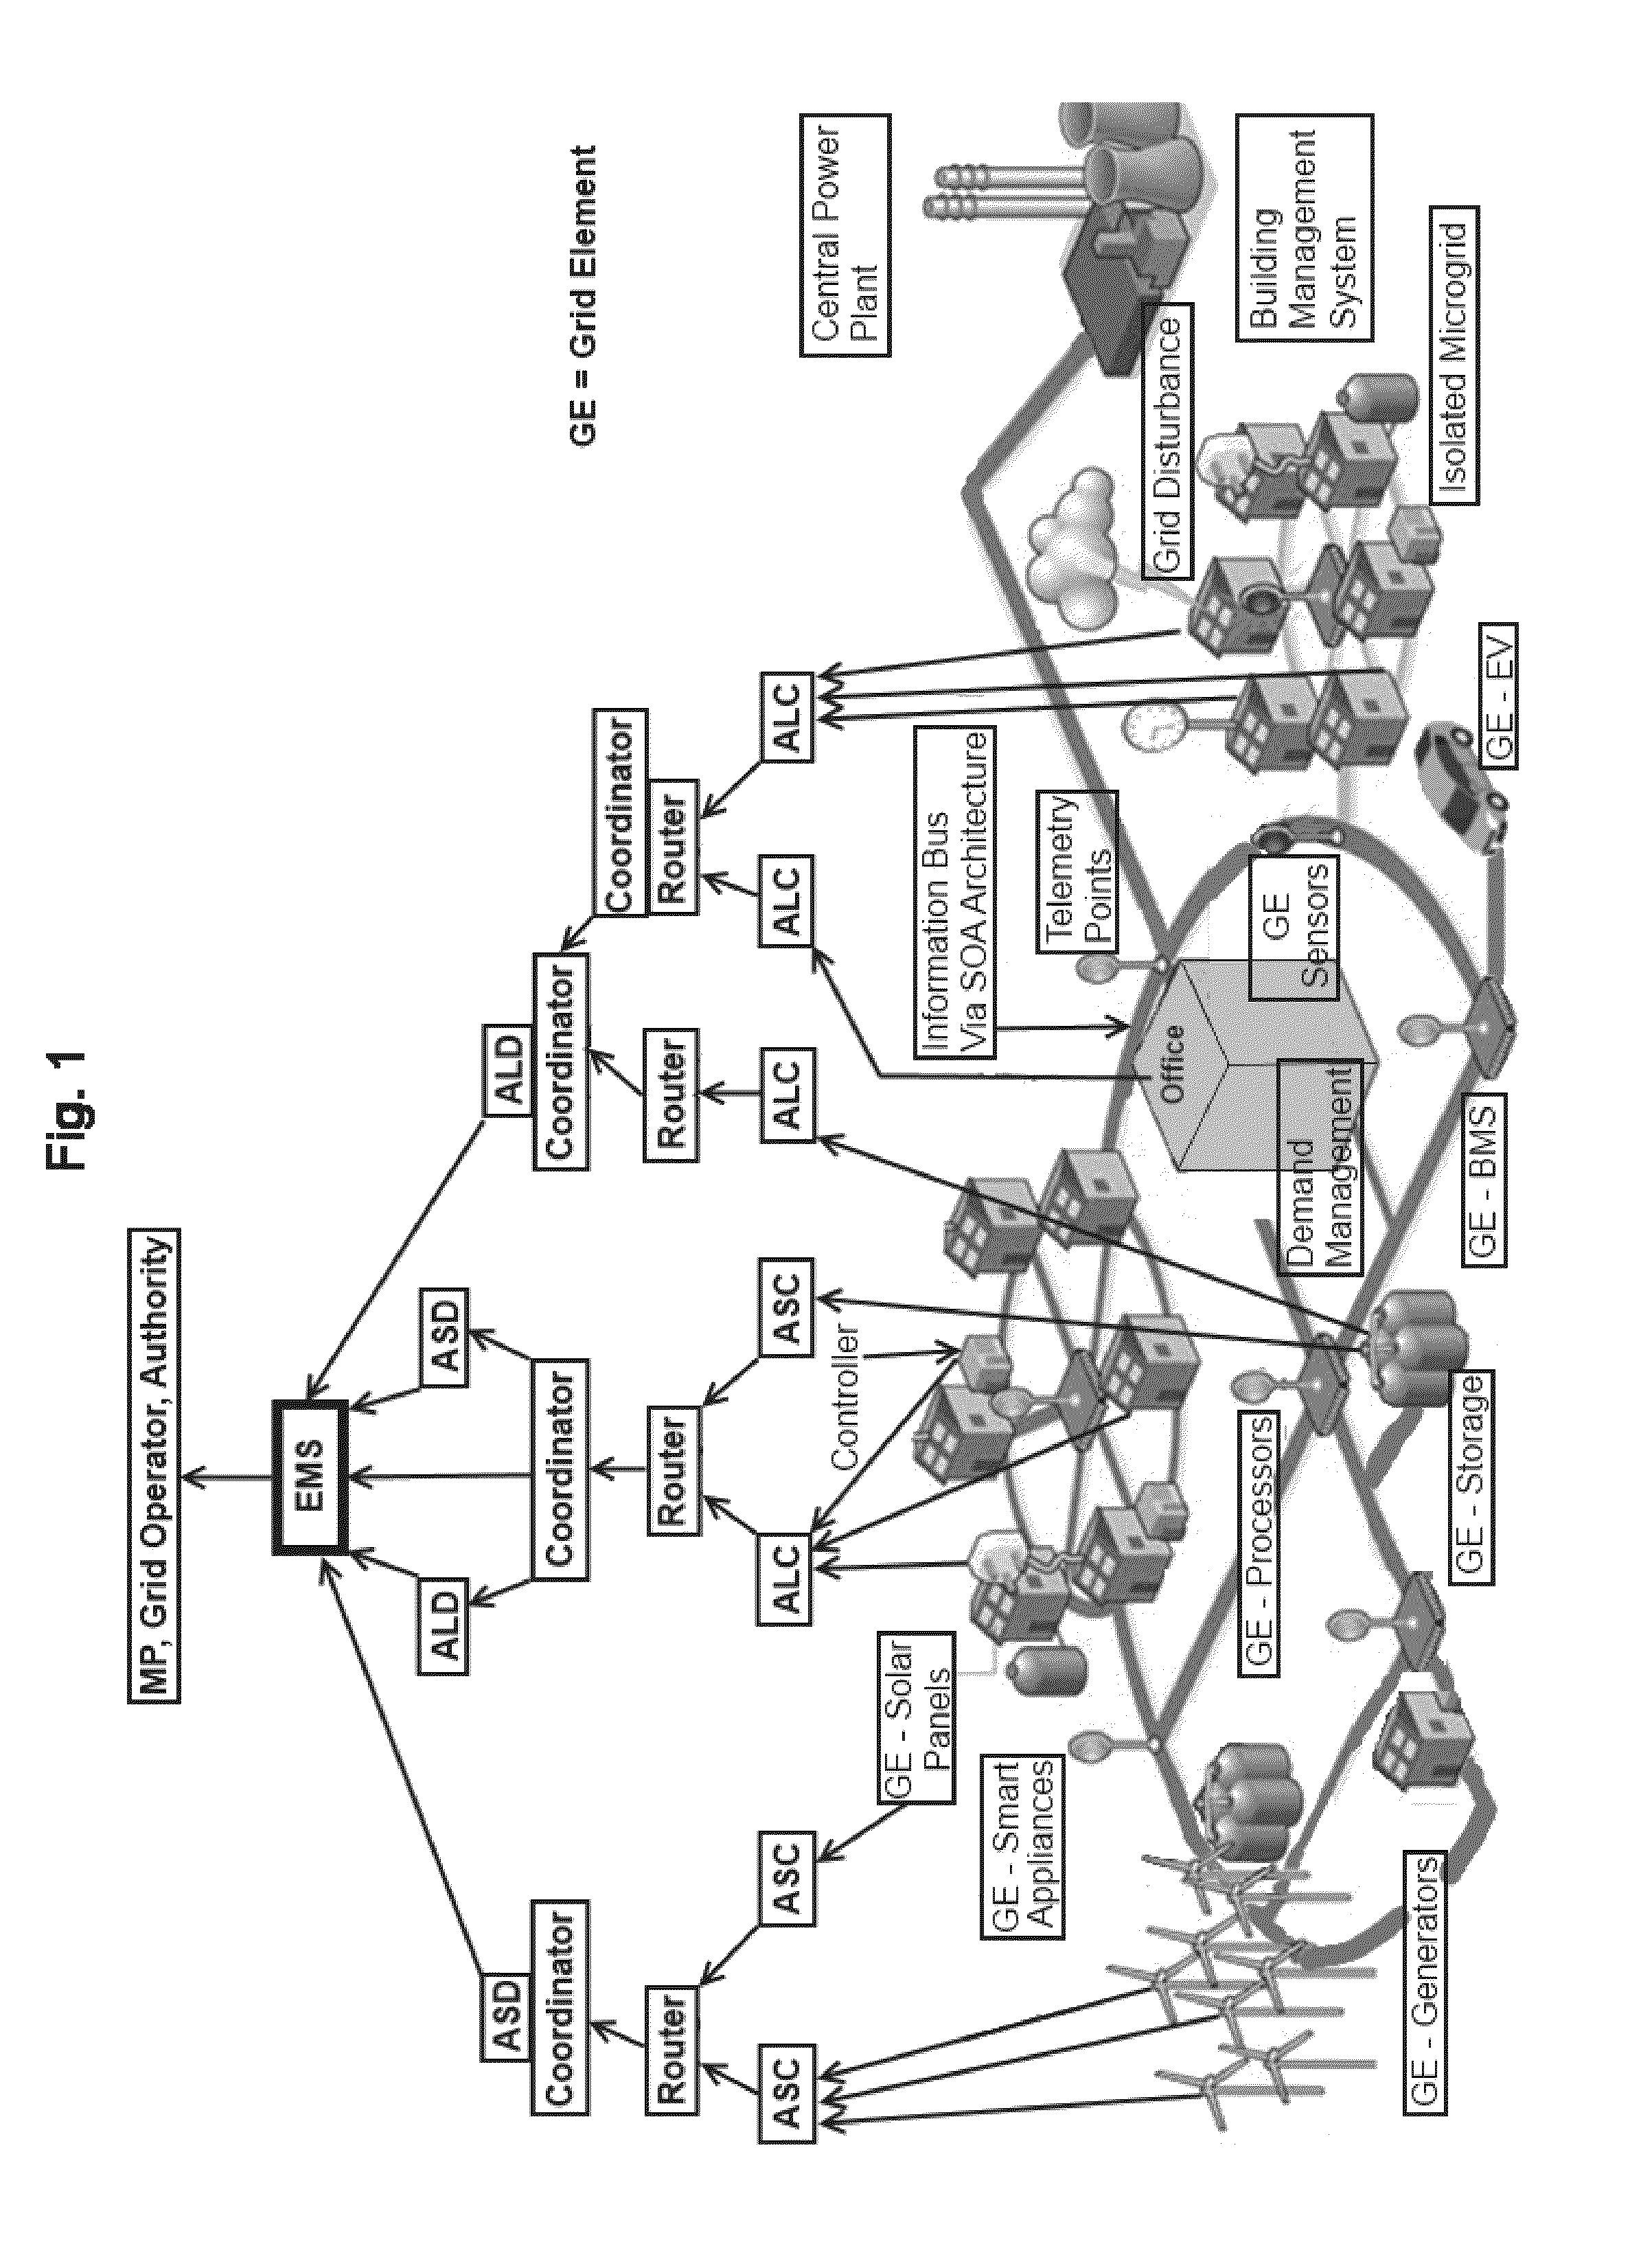 System, method, and apparatus for electric power grid and network management of grid elements